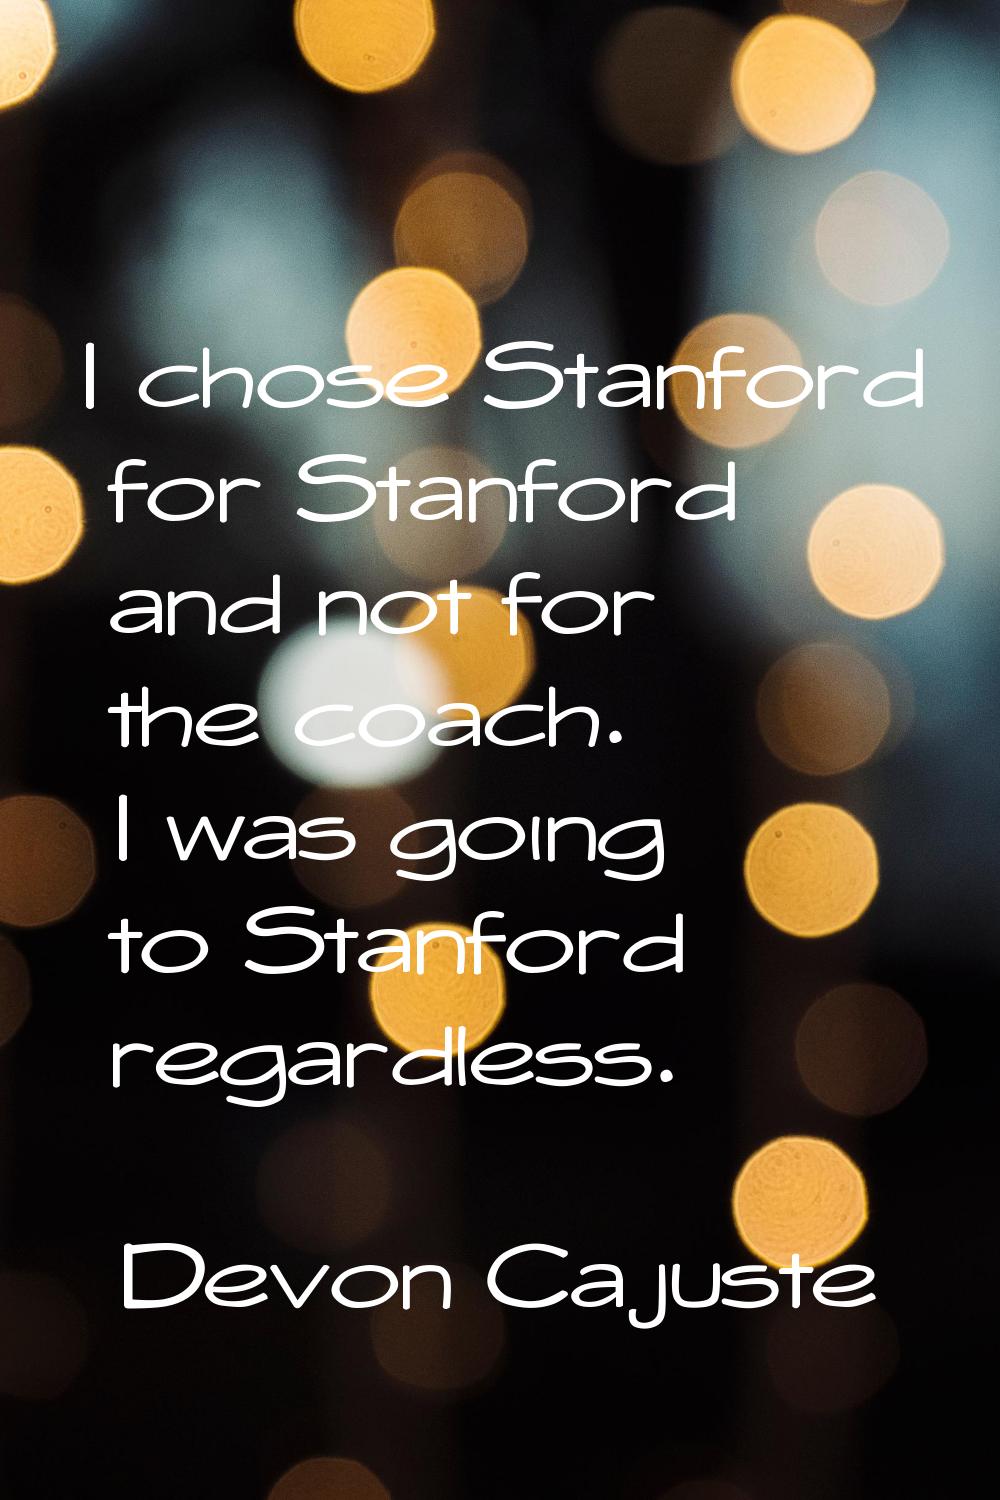 I chose Stanford for Stanford and not for the coach. I was going to Stanford regardless.